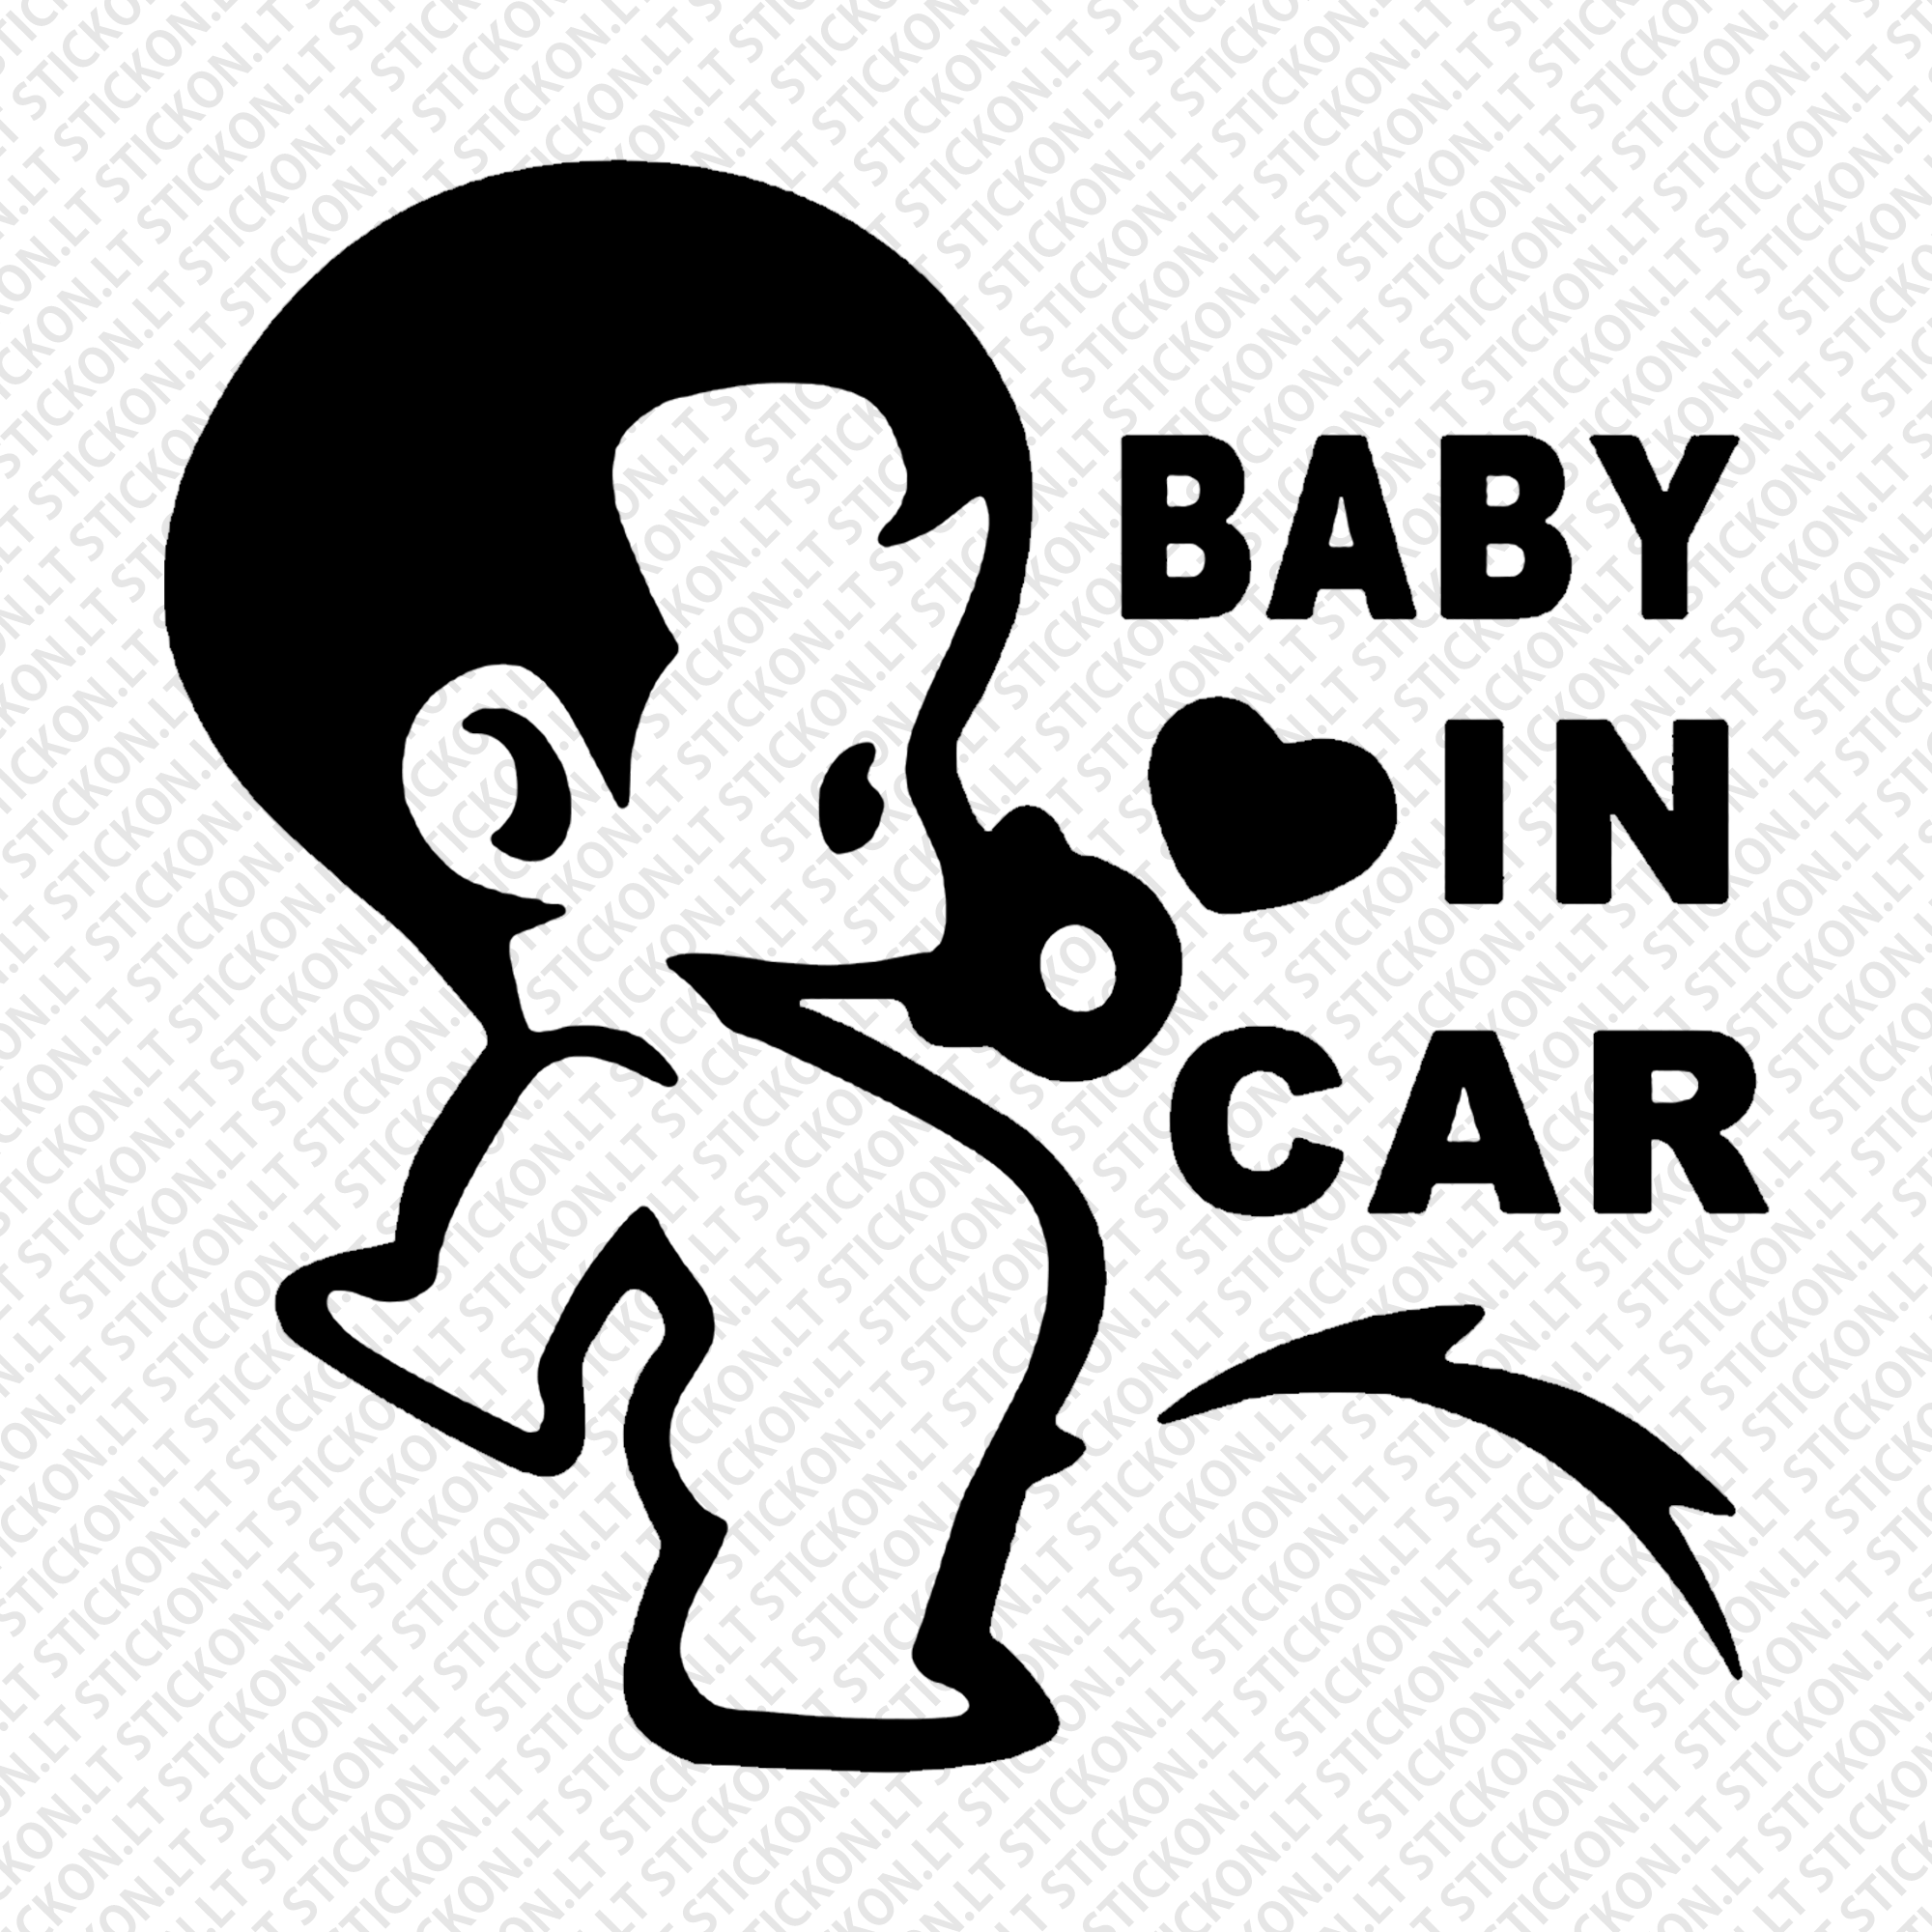 "Baby in car"